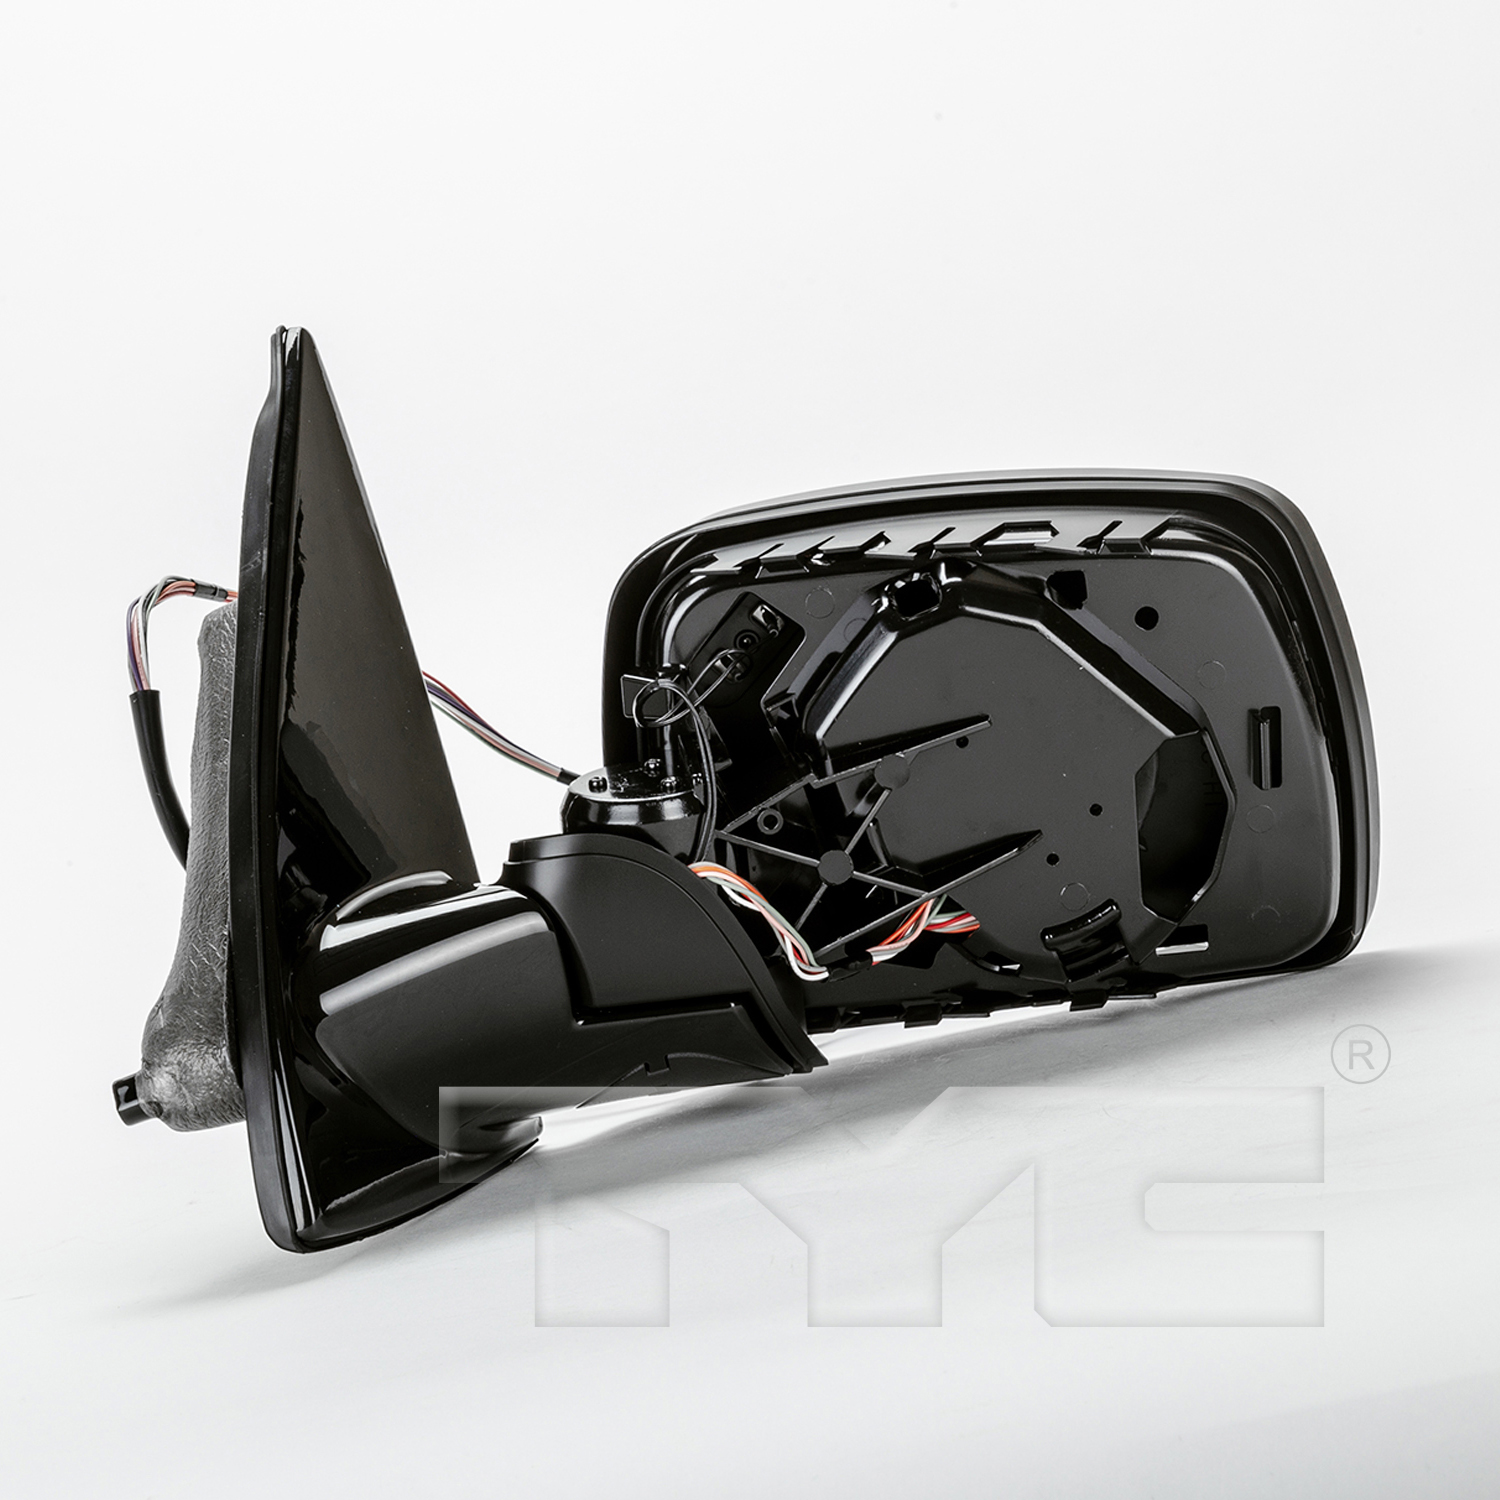 Aftermarket MIRRORS for BMW - X5, X5,00-06,LT Mirror outside rear view